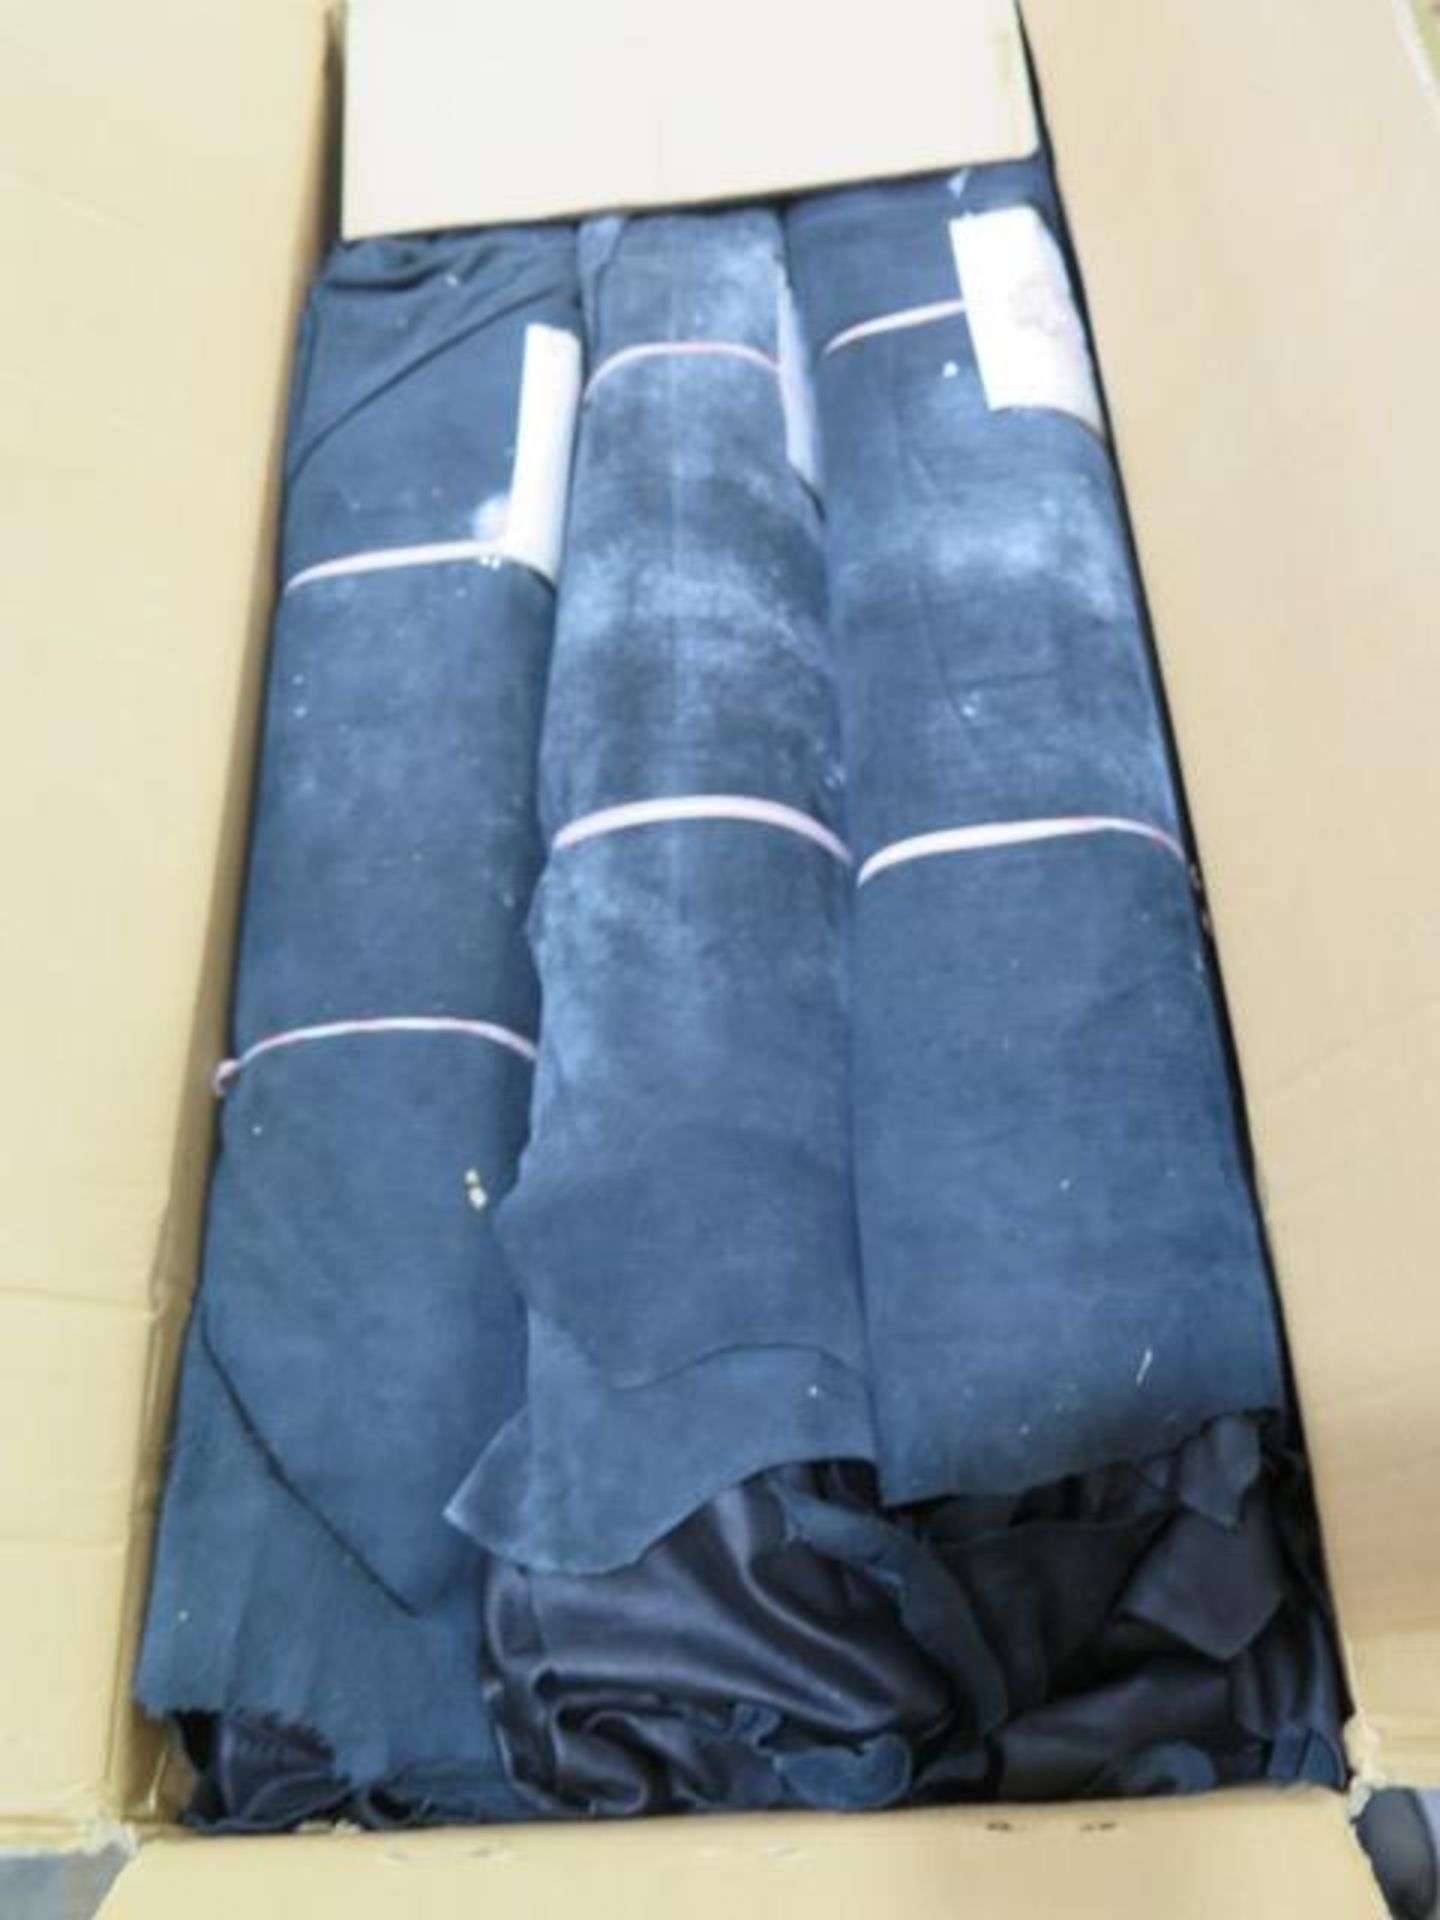 Leather Lamb Skin, Black, 4500 Sq/Ft (SOLD AS-IS - NO WARRANTY) - Image 3 of 8